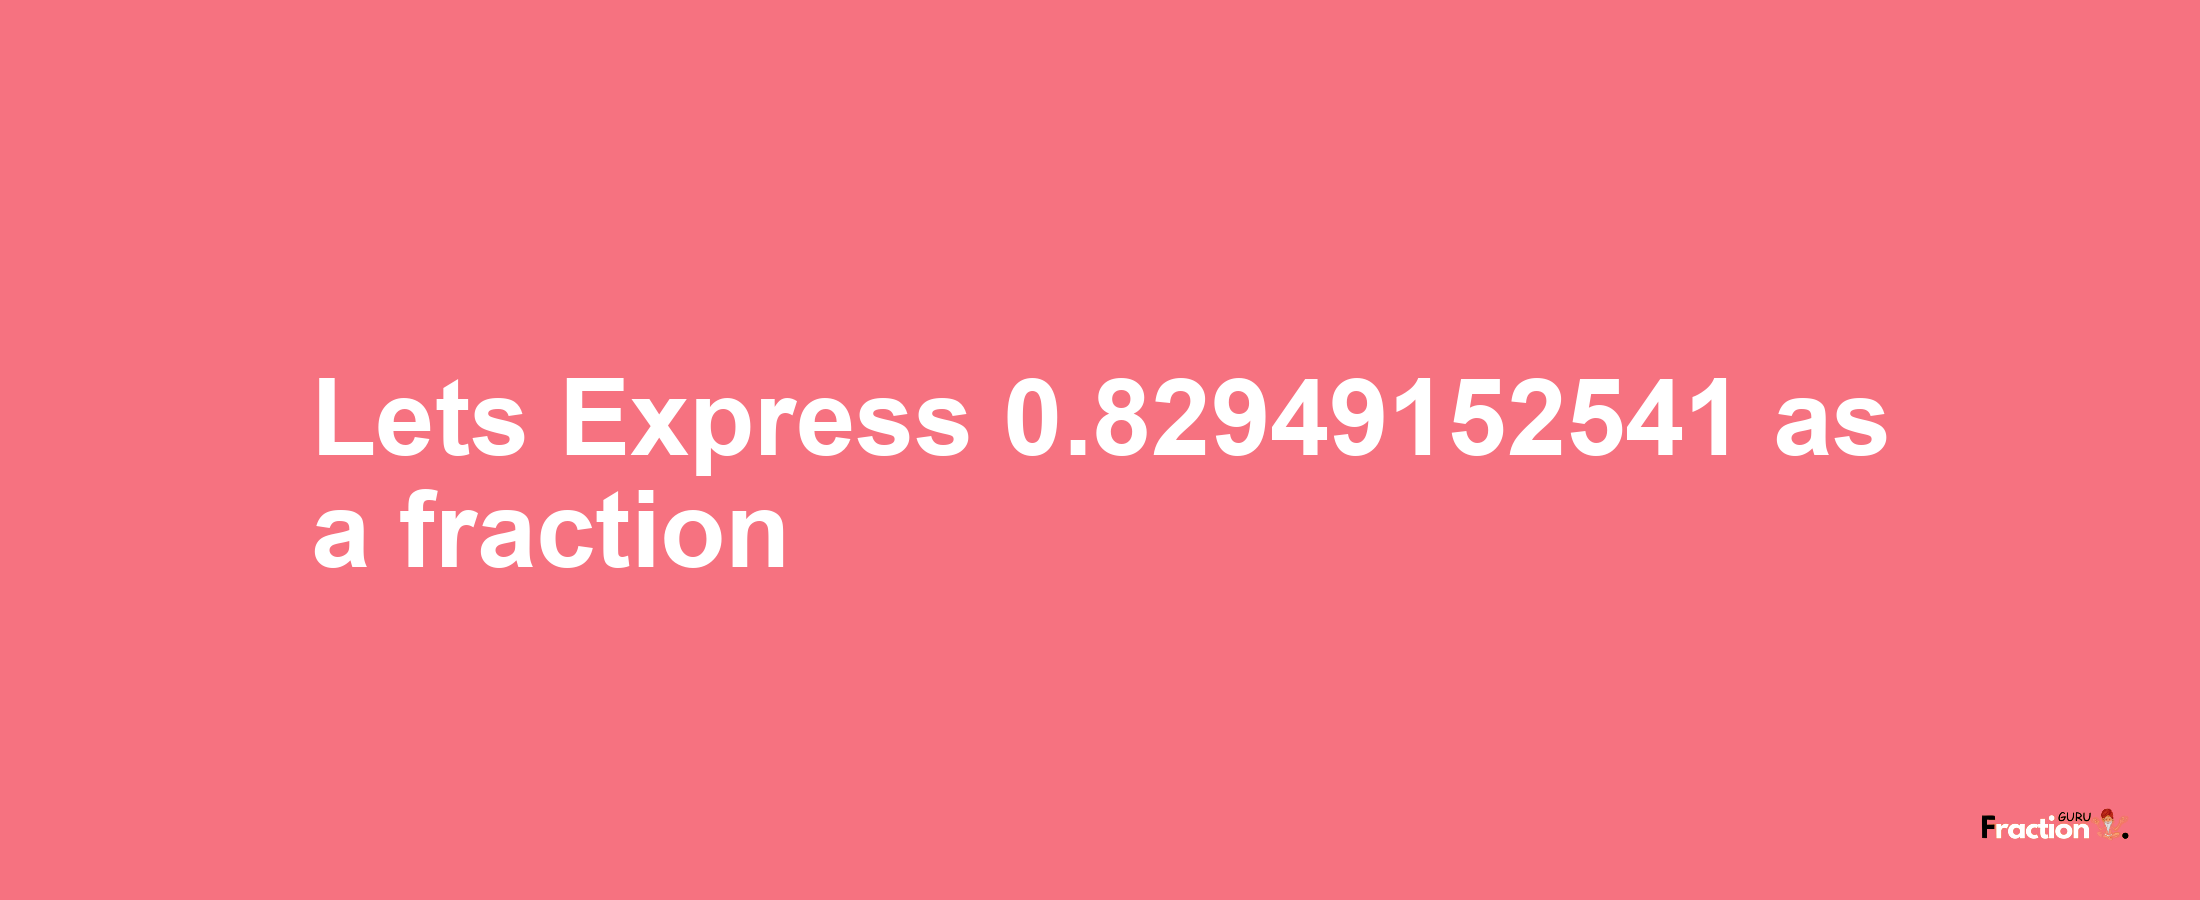 Lets Express 0.82949152541 as afraction